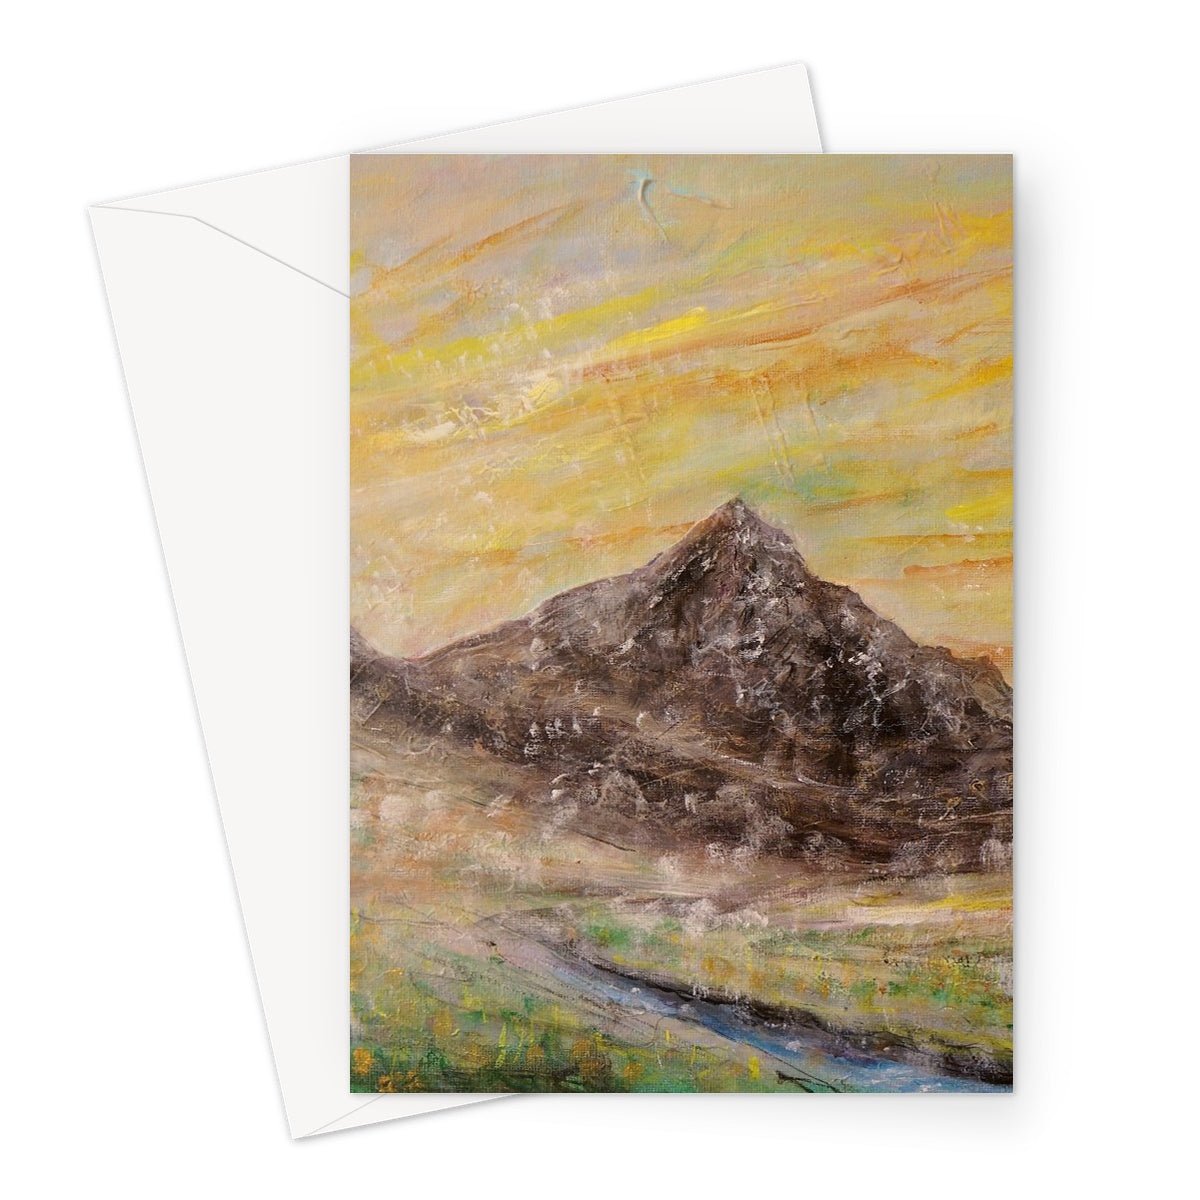 Glen Rosa Mist Arran Art Gifts Greeting Card-Greetings Cards-Arran Art Gallery-A5 Portrait-10 Cards-Paintings, Prints, Homeware, Art Gifts From Scotland By Scottish Artist Kevin Hunter